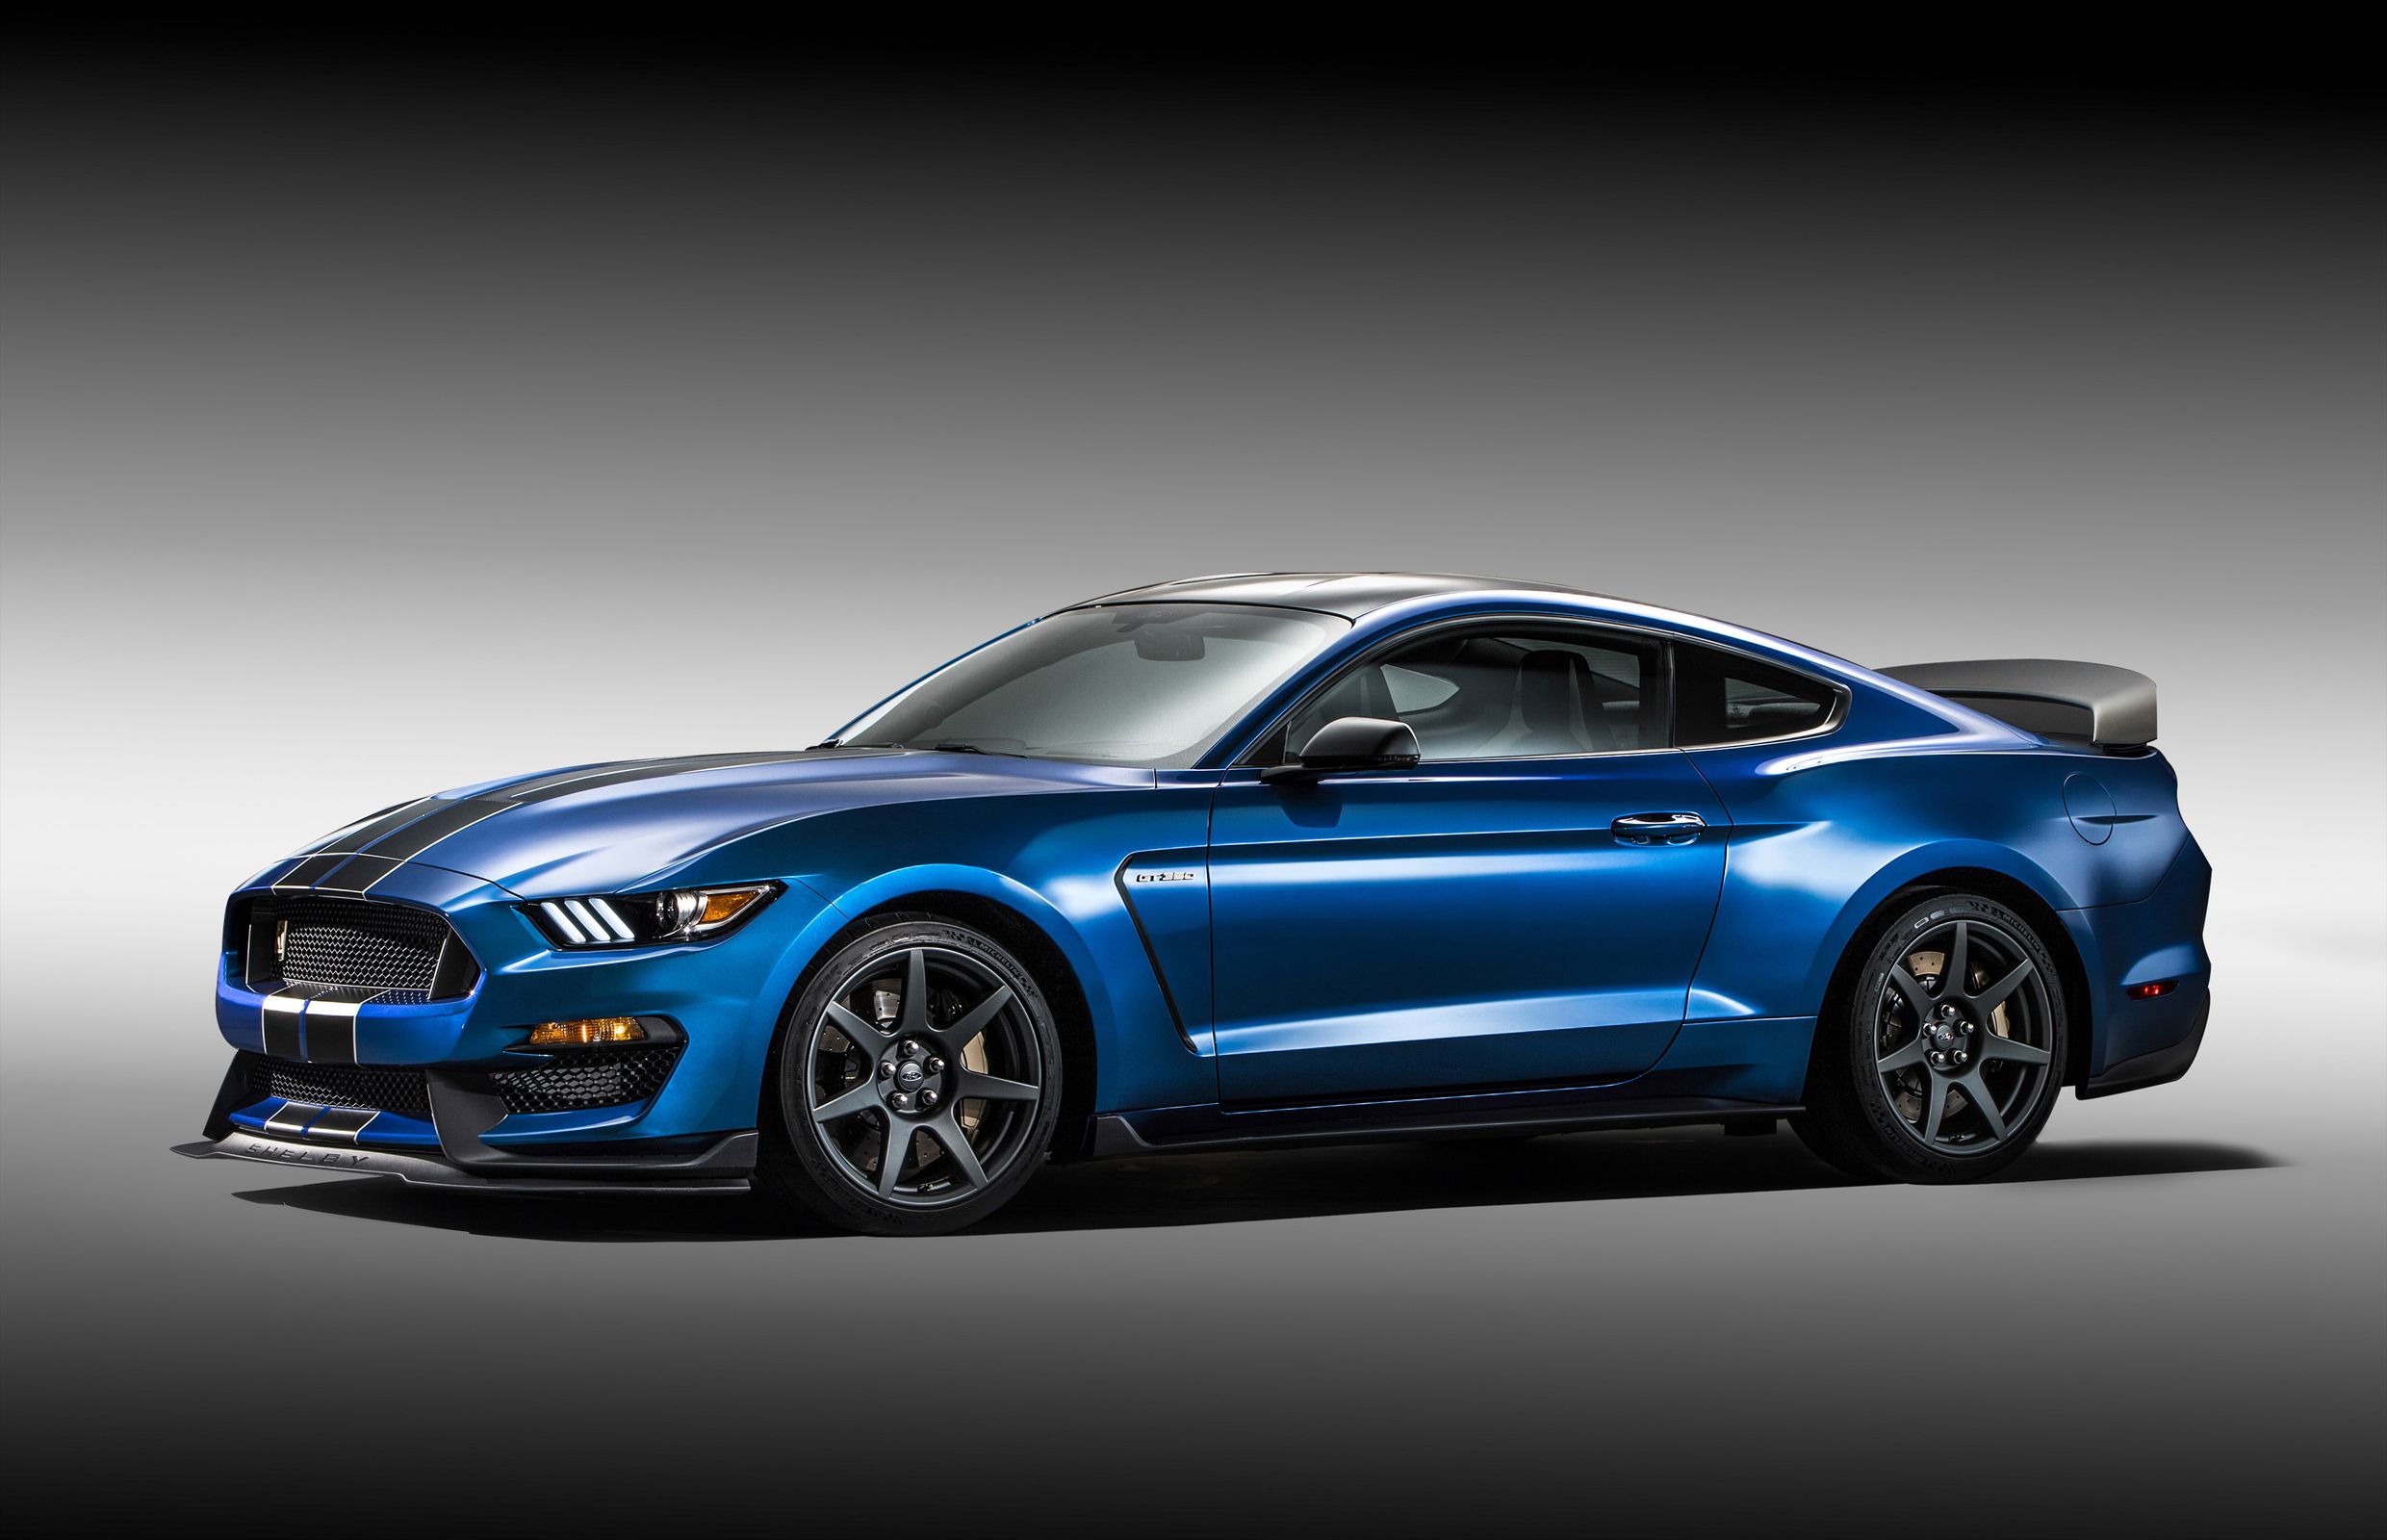 Next Ford Mustang GT500 expected to top 700+ horsepower | Driving